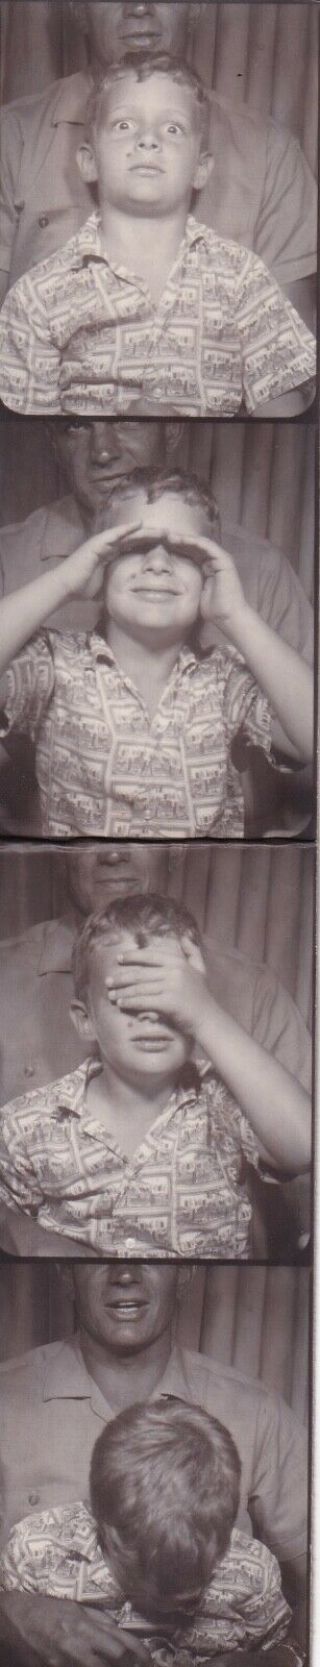 Vintage Photo Booth - 4 Photos - Funny Young Boy W/dad,  Making Faces,  Hiding